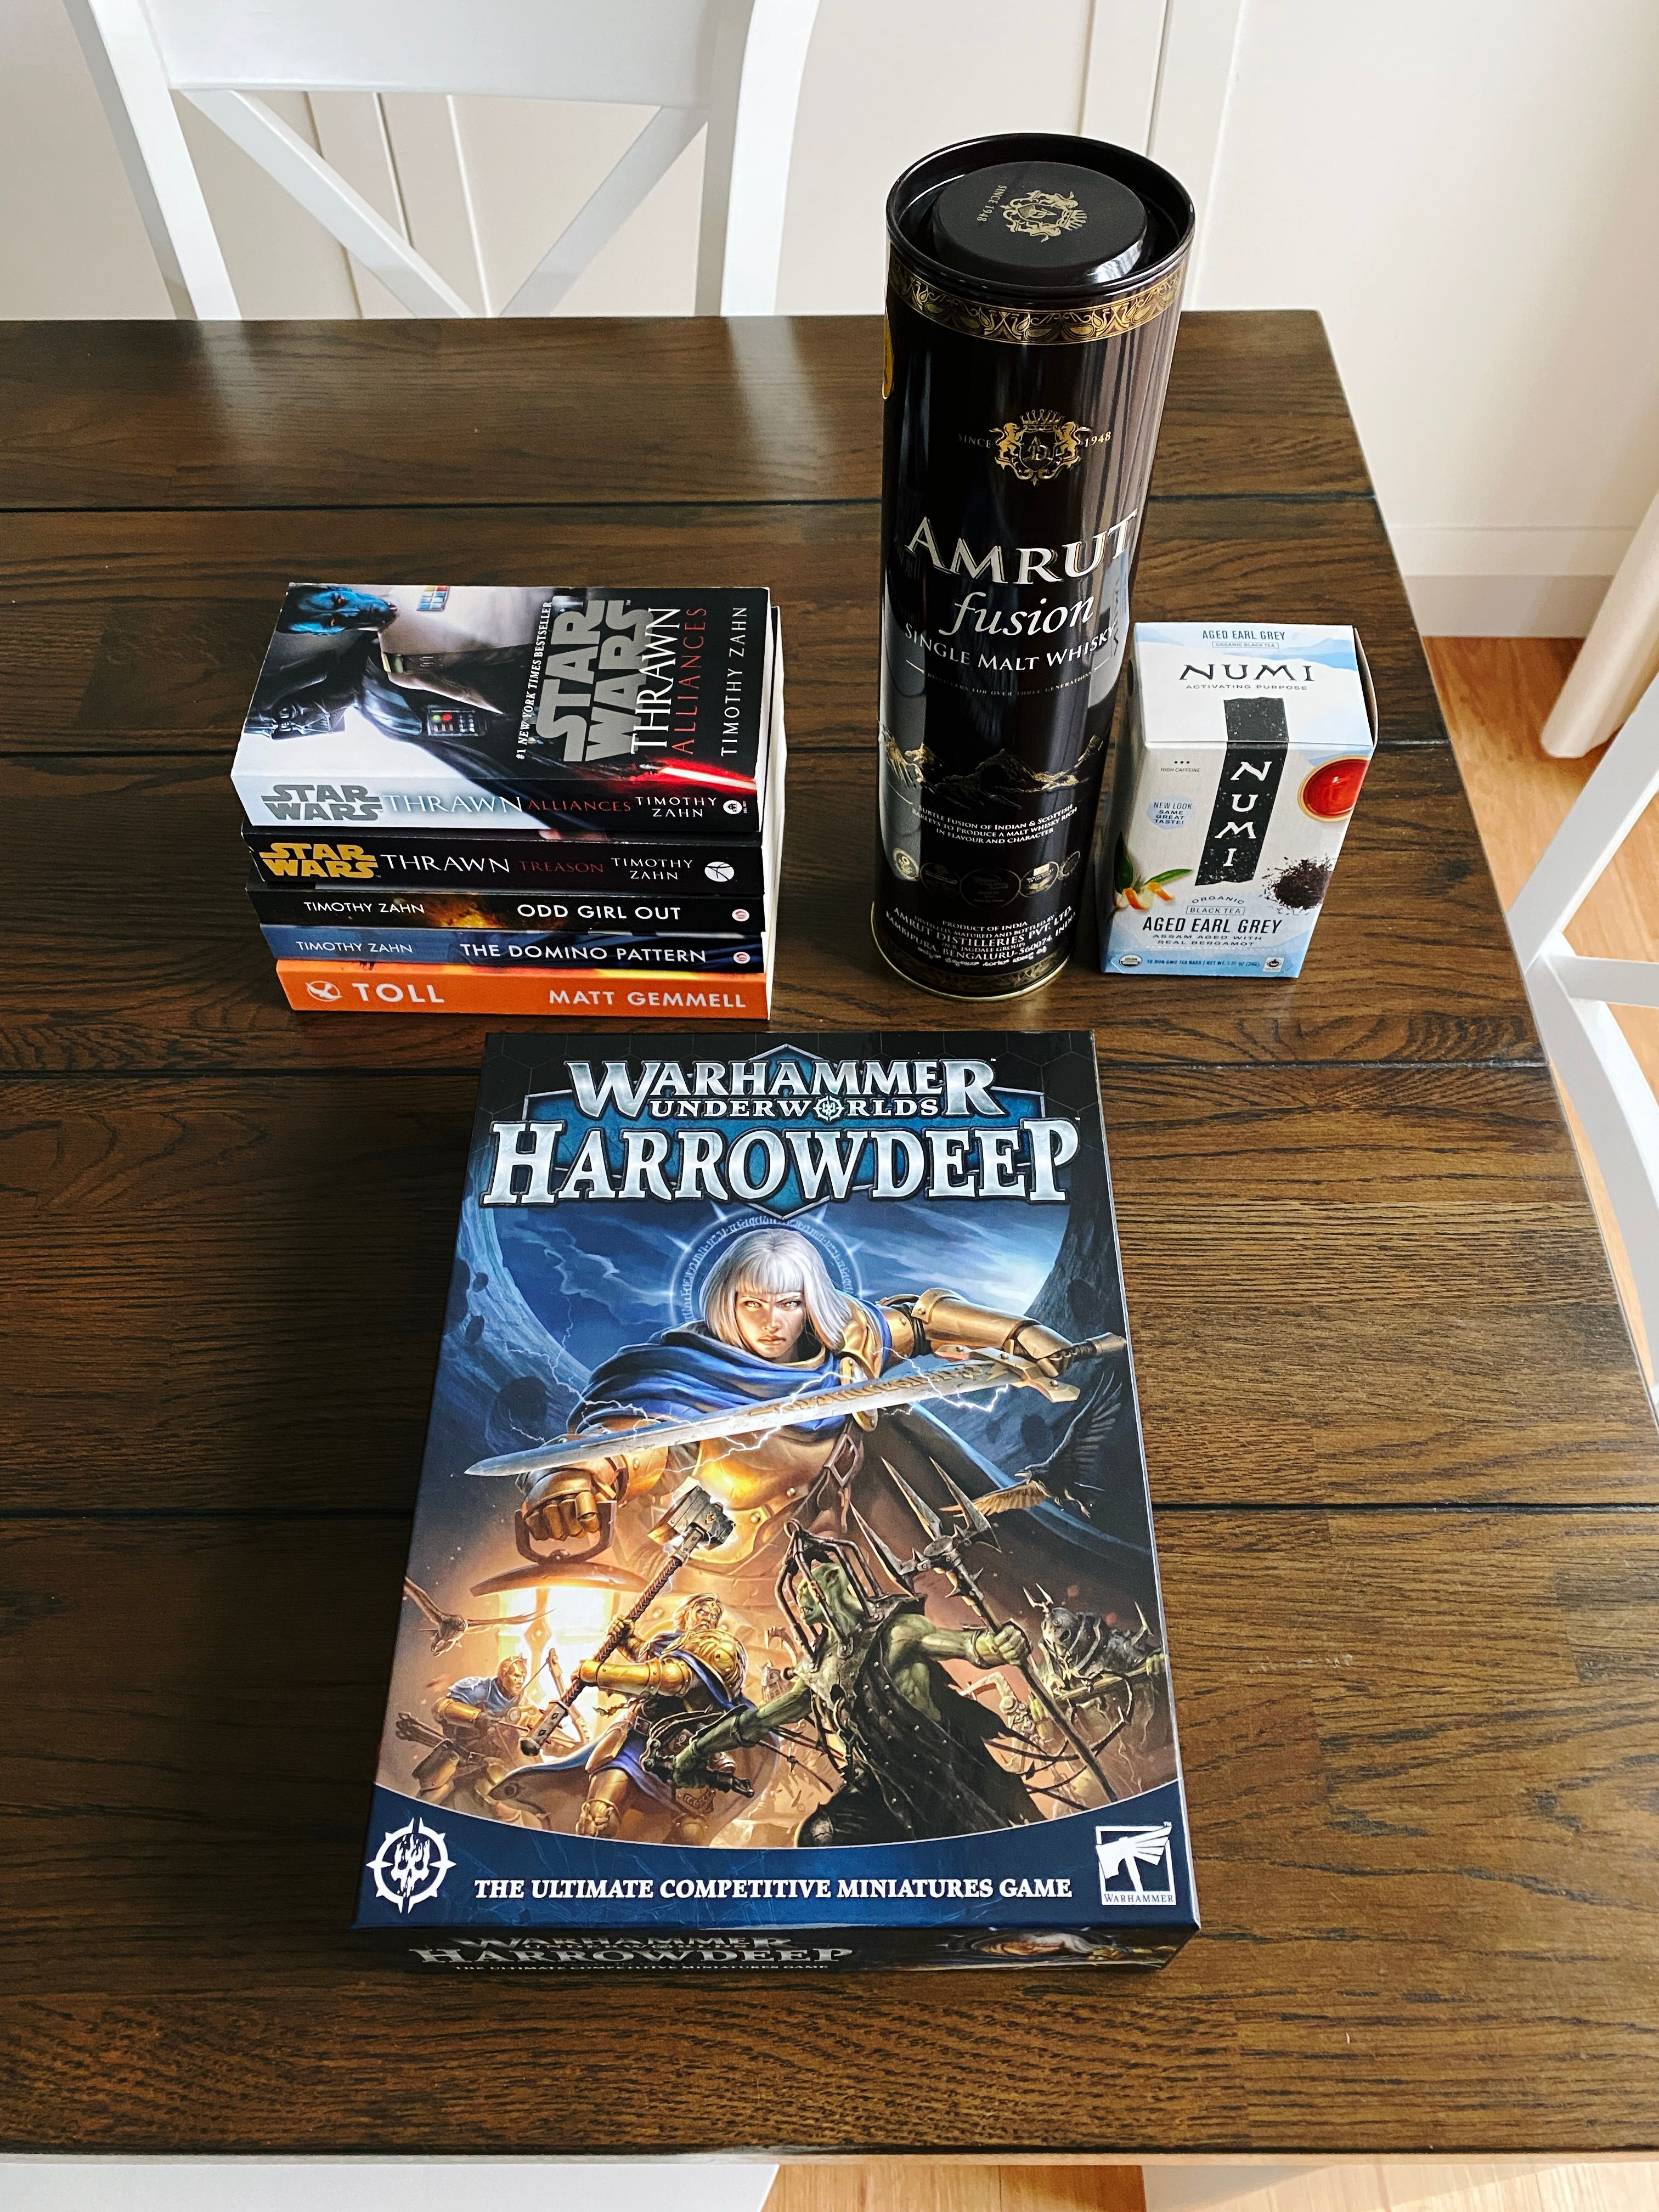 A photo of five novels, the latest edition of Games Workshop's "Warhammer Underworlds" game called "Harrowdeep", a cylindrical container with a bottle of whisky in it, and a box of "aged" Earl Grey tea.